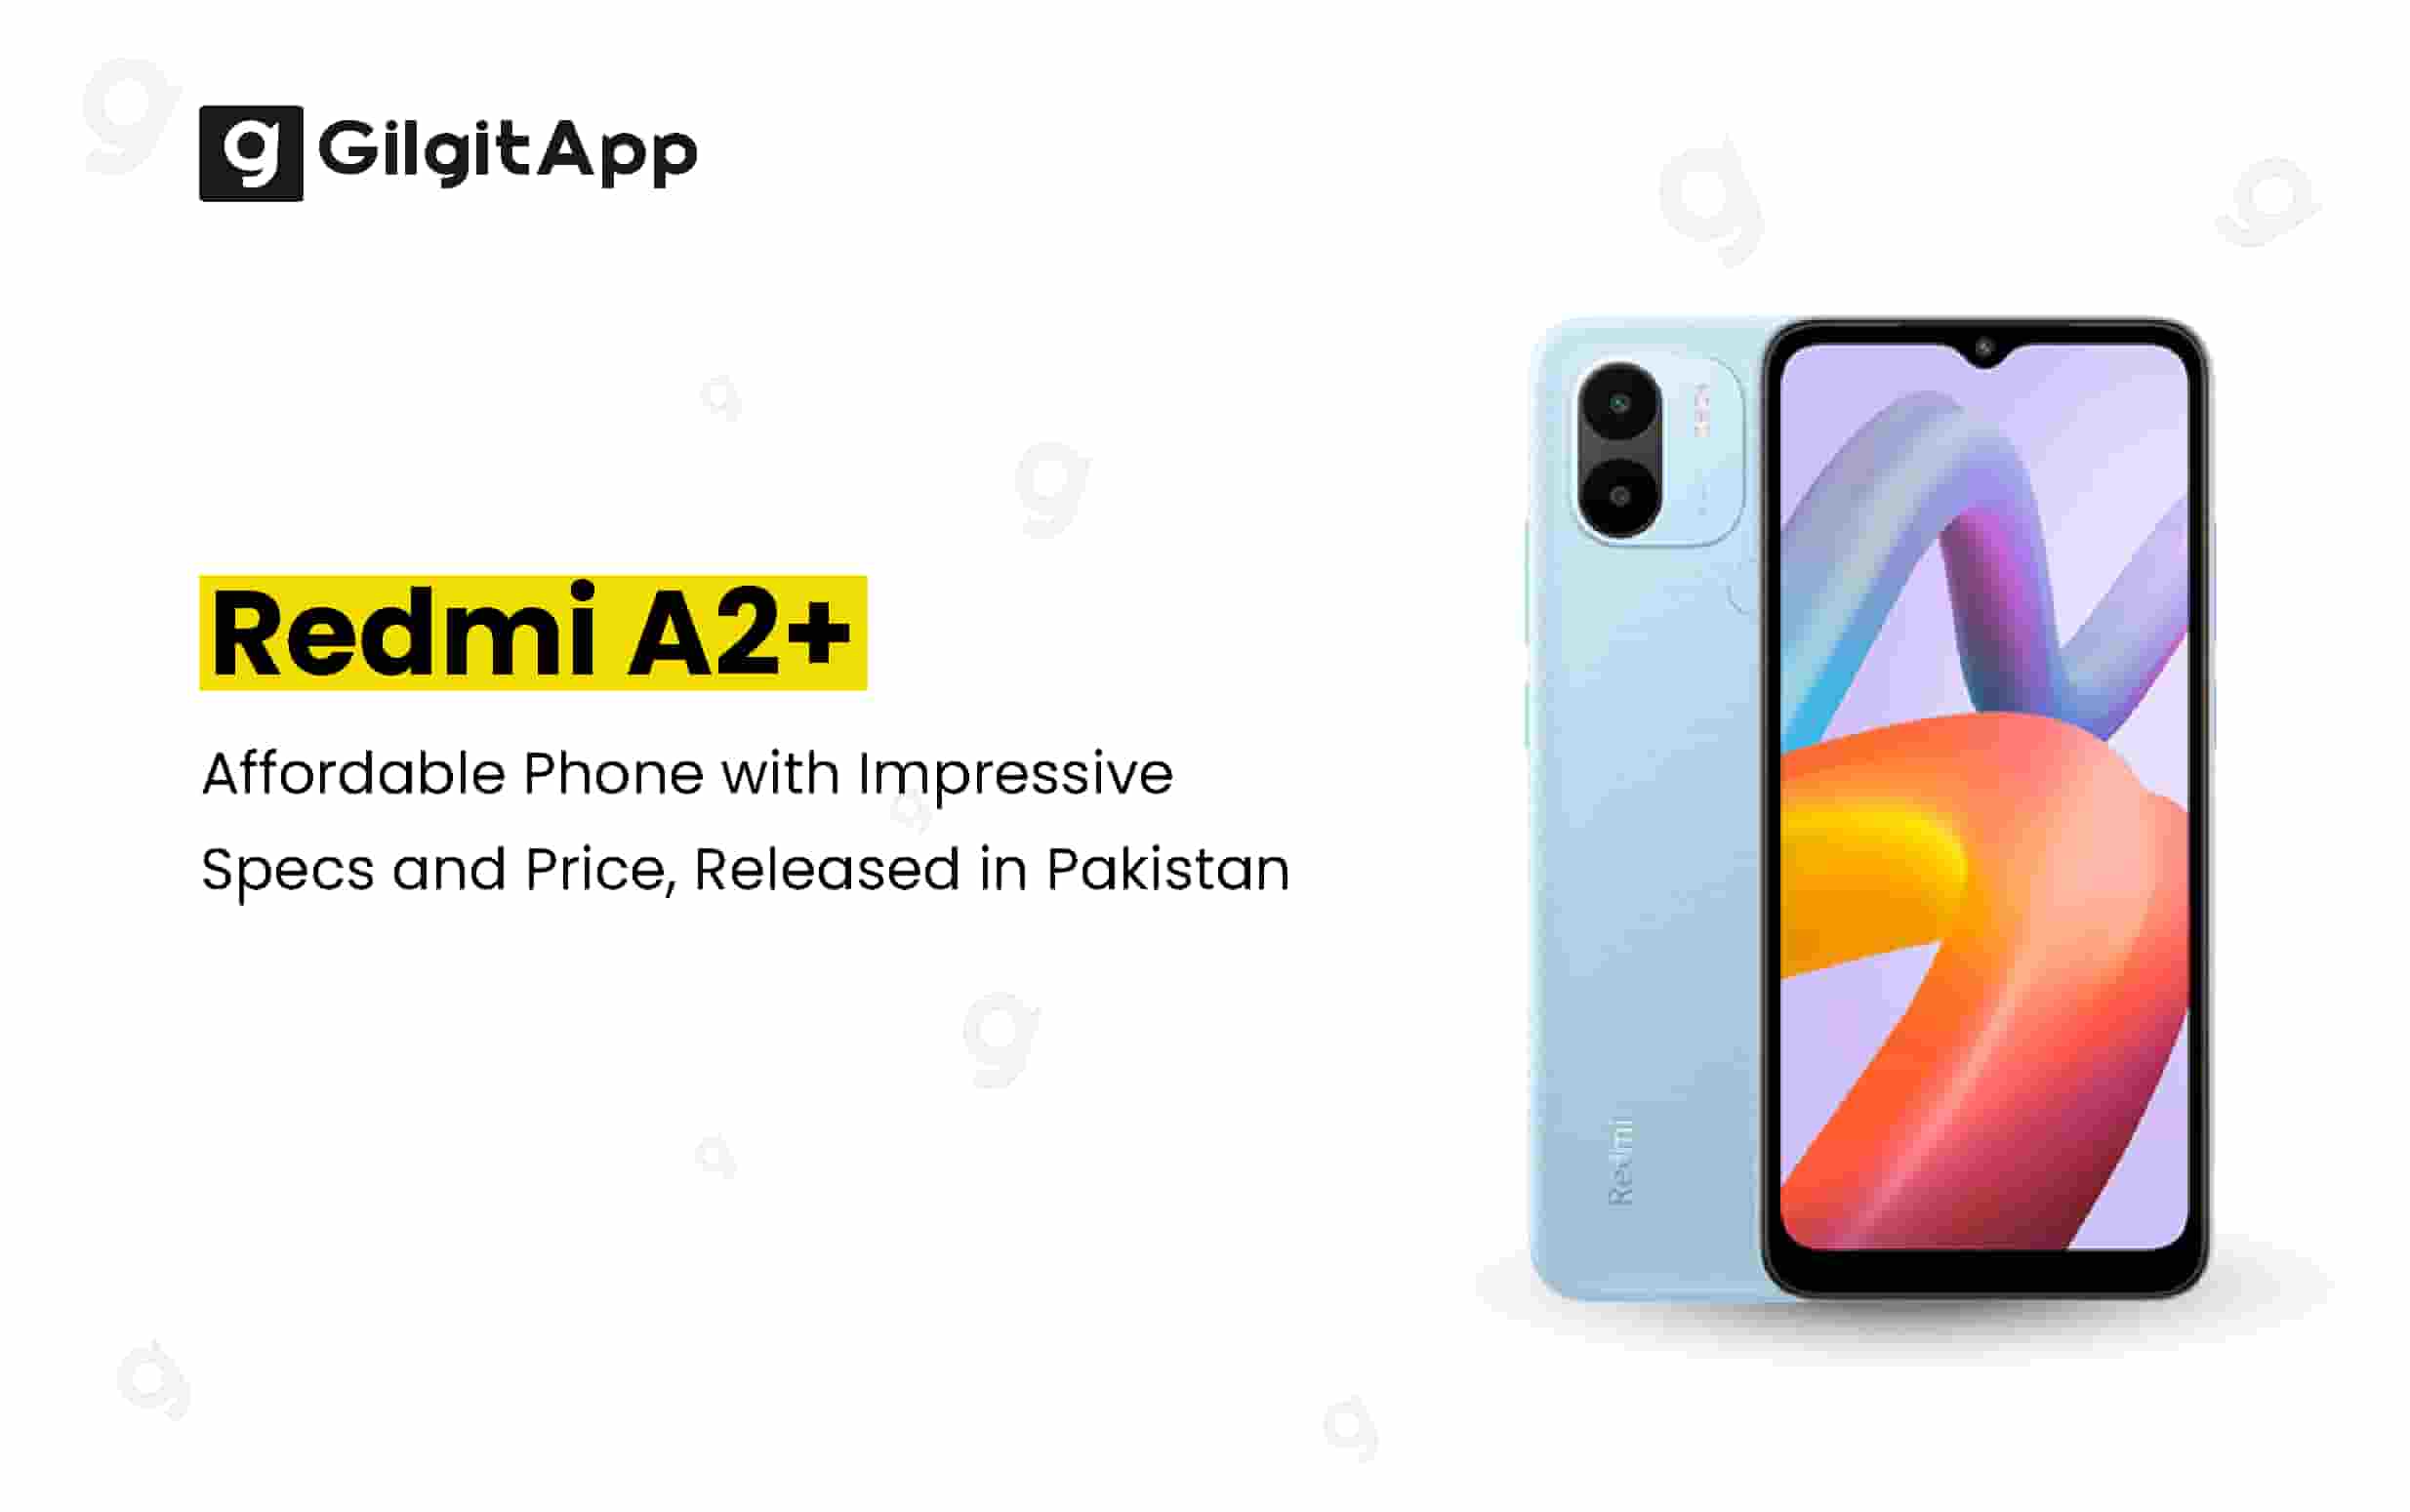 Redmi A2 - Full Specifications